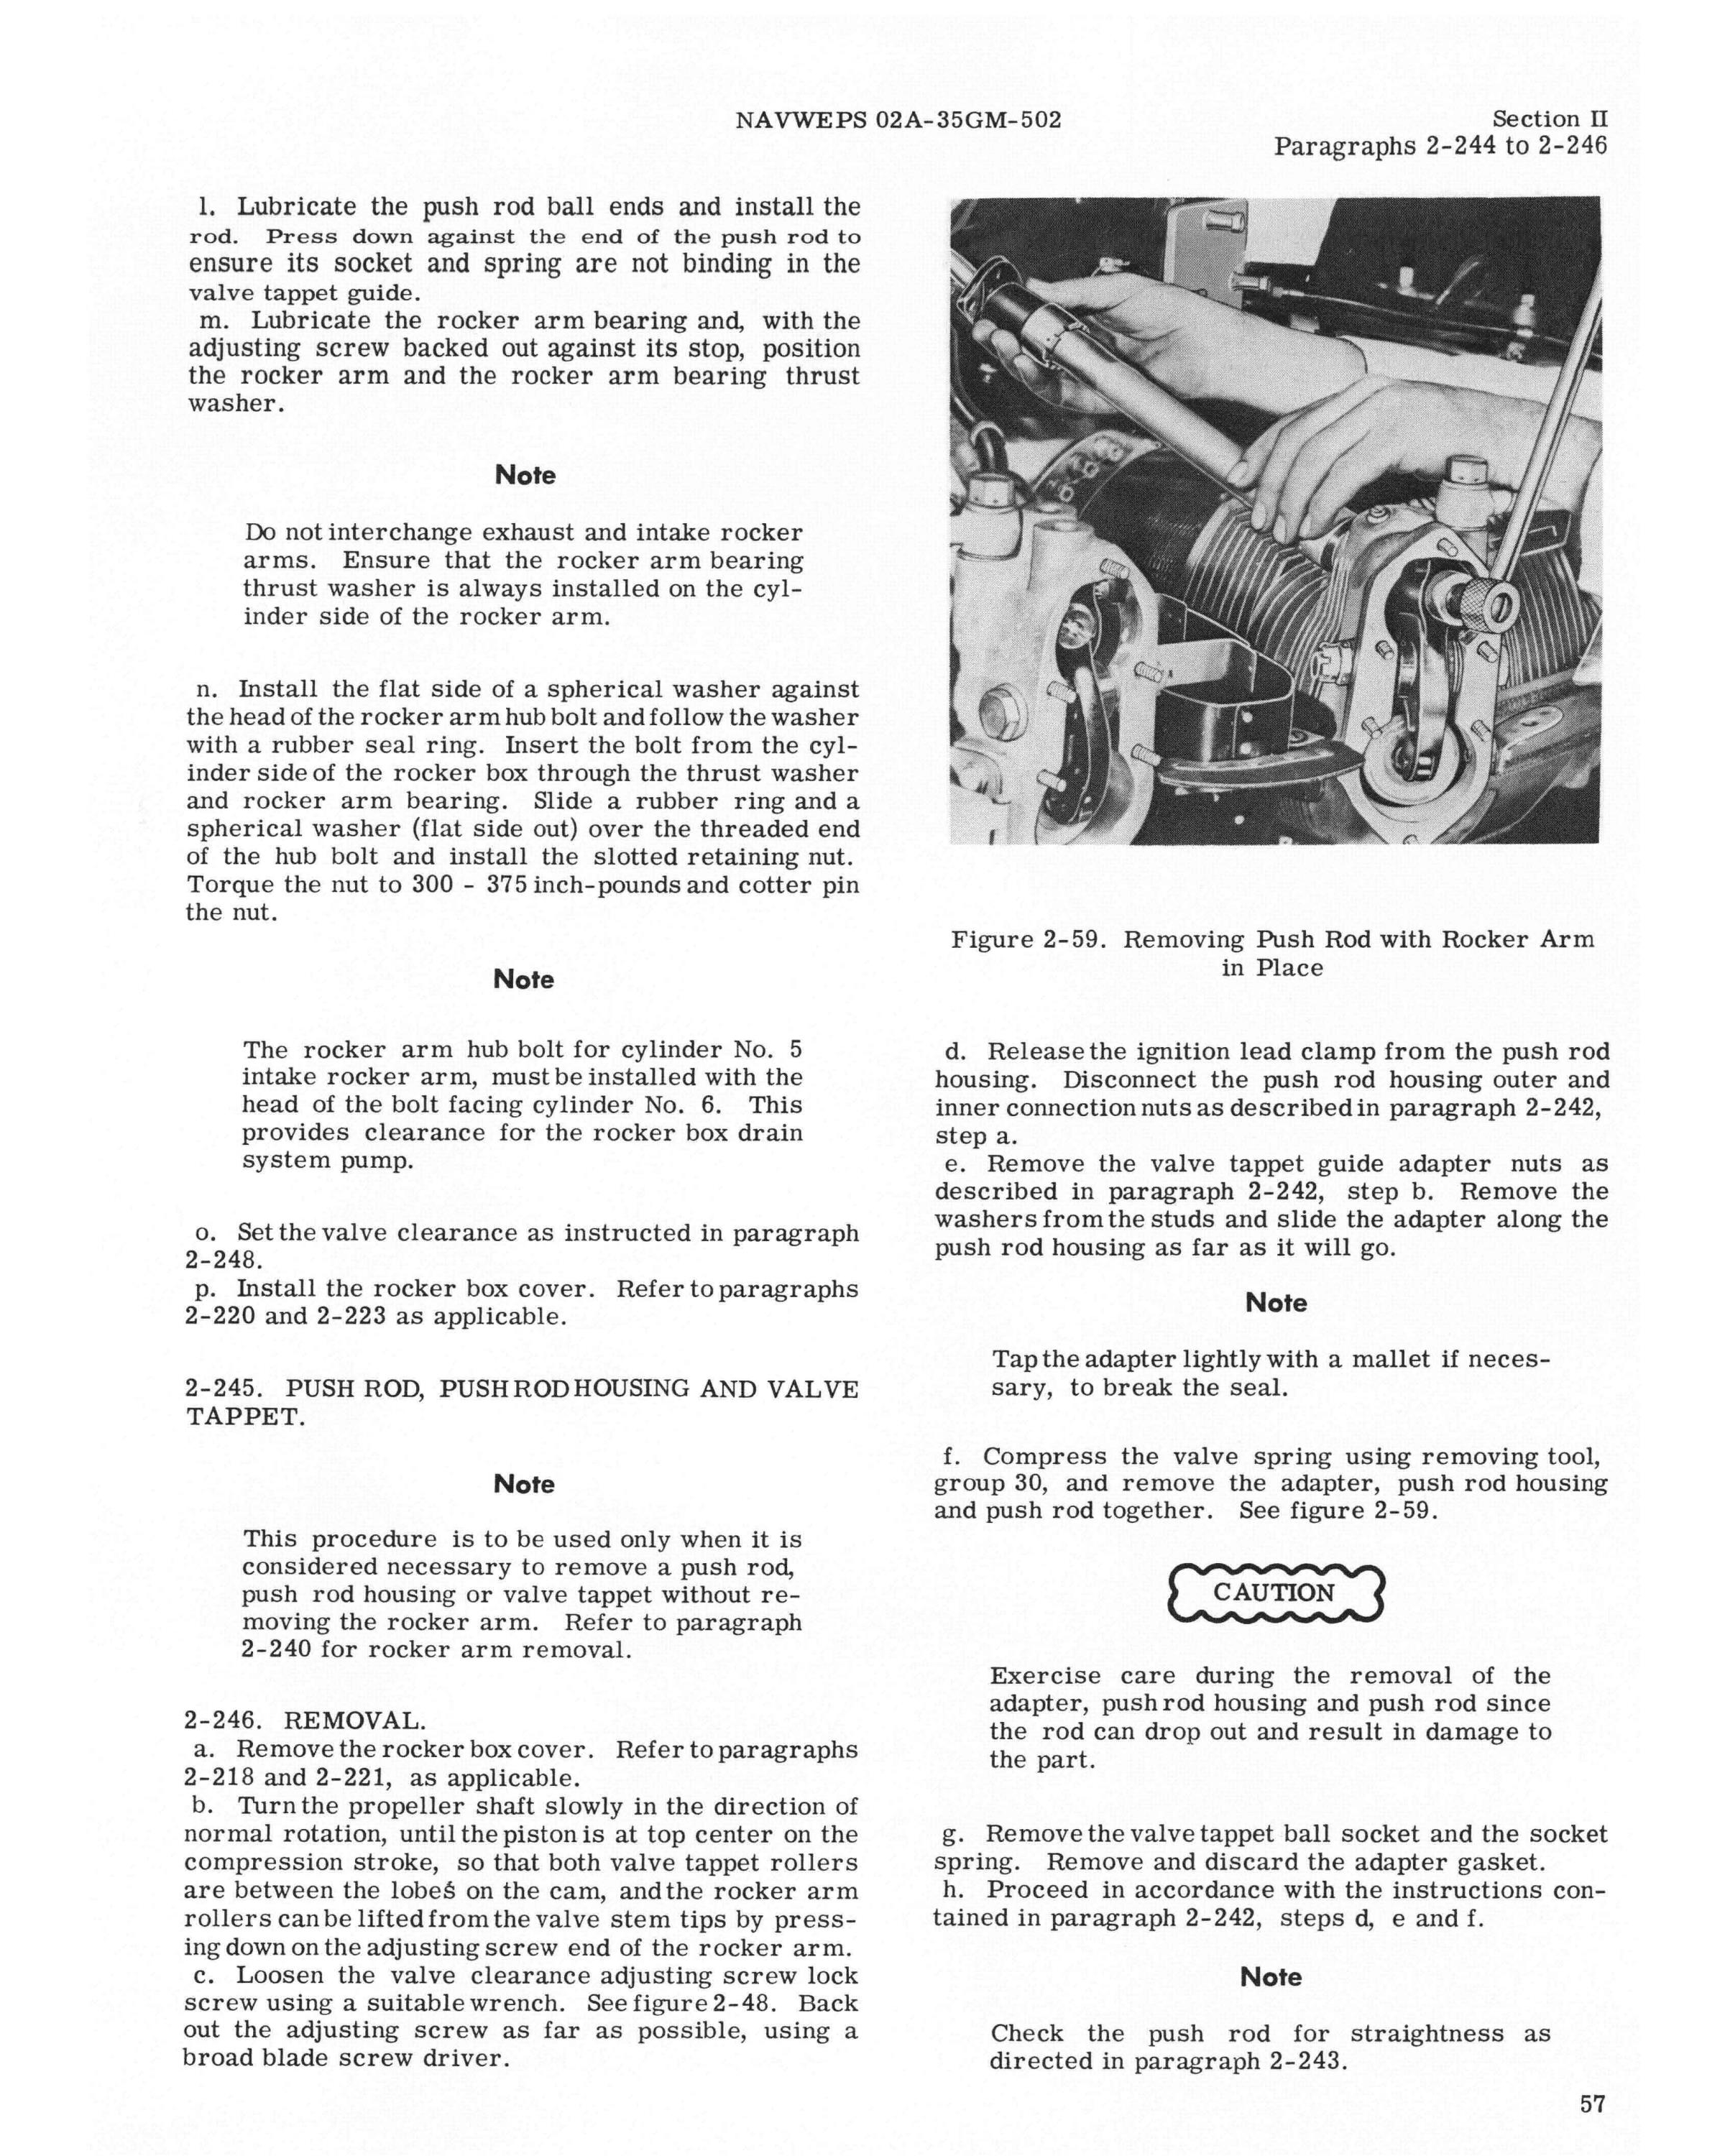 Sample page 7 from AirCorps Library document: Service Instructions for R-1820-84, -84A, and -84B Aircraft Engines